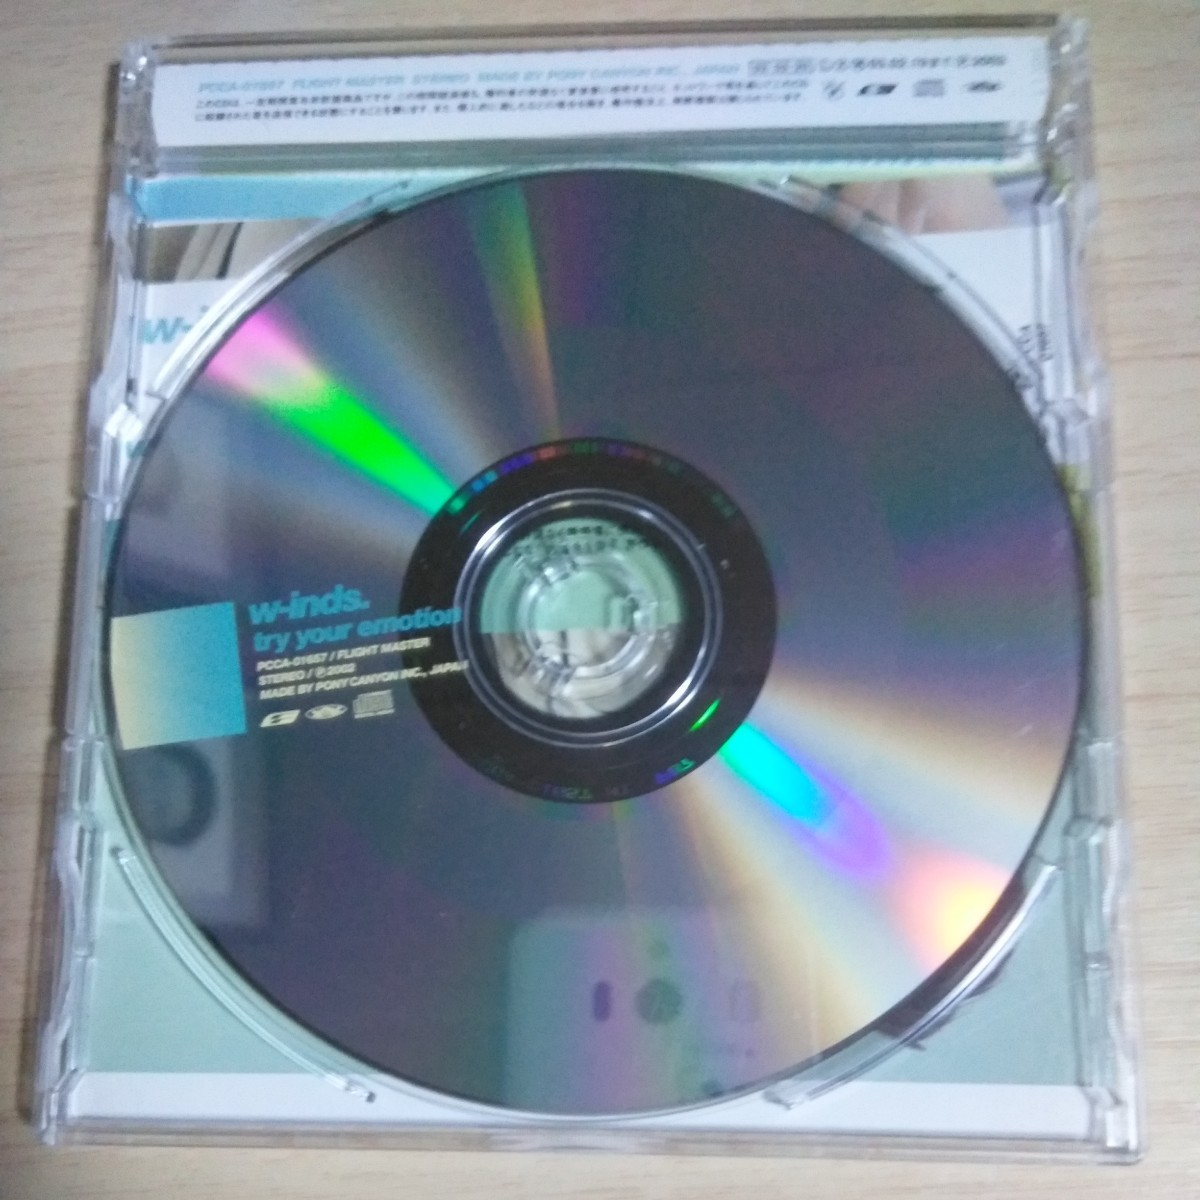 RR003　CD　ウィンズ　１．try your emotion　２．Graduation_画像2